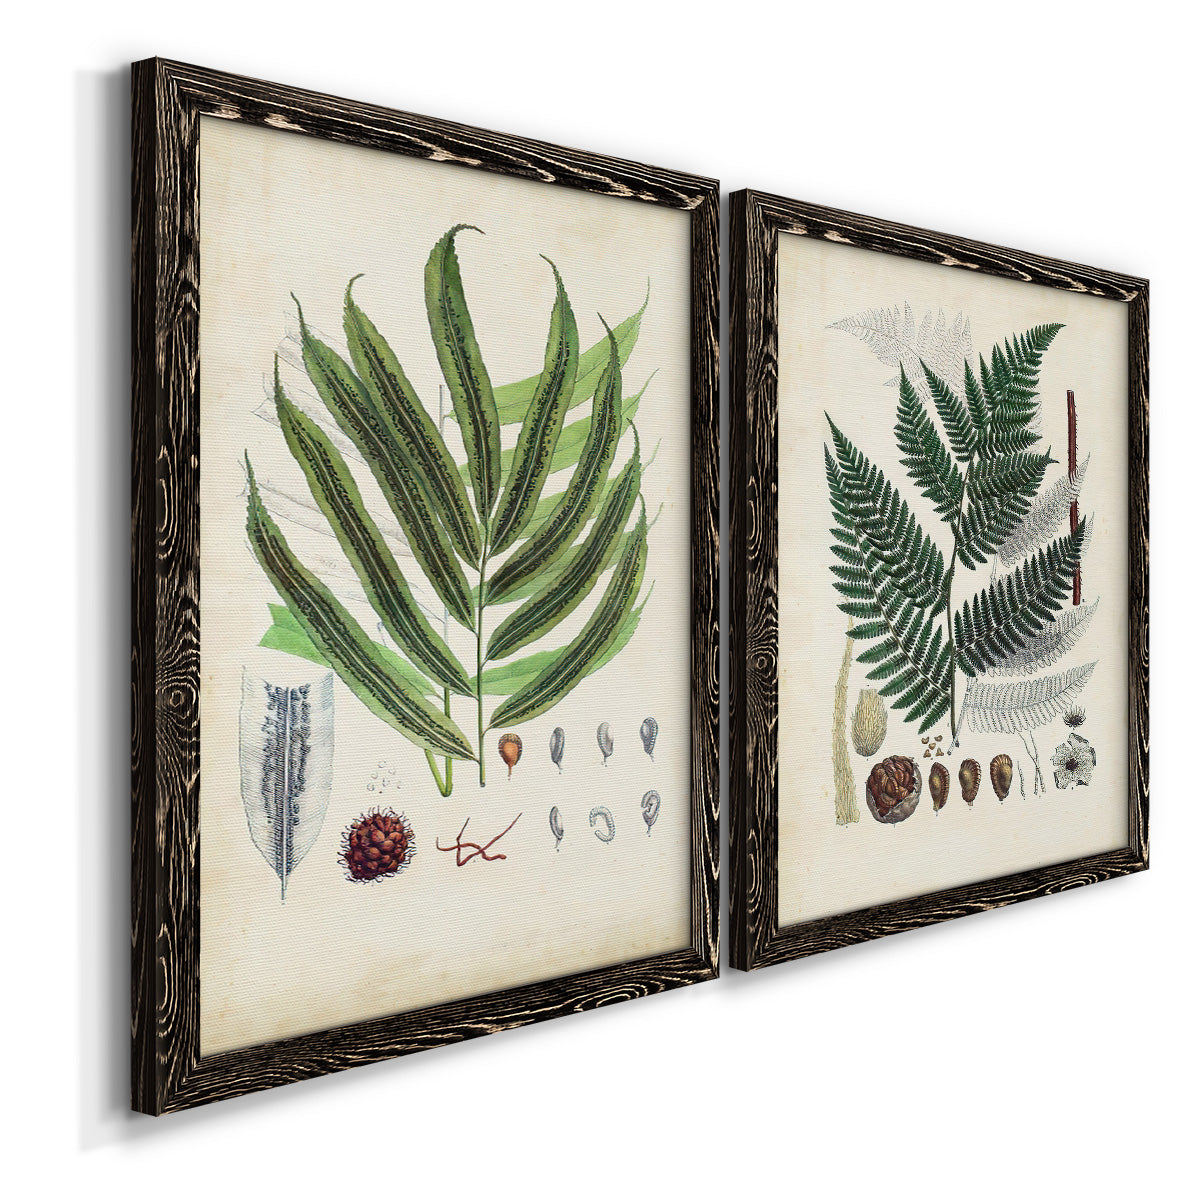 Collected Ferns III - Premium Framed Canvas 2 Piece Set - Ready to Hang